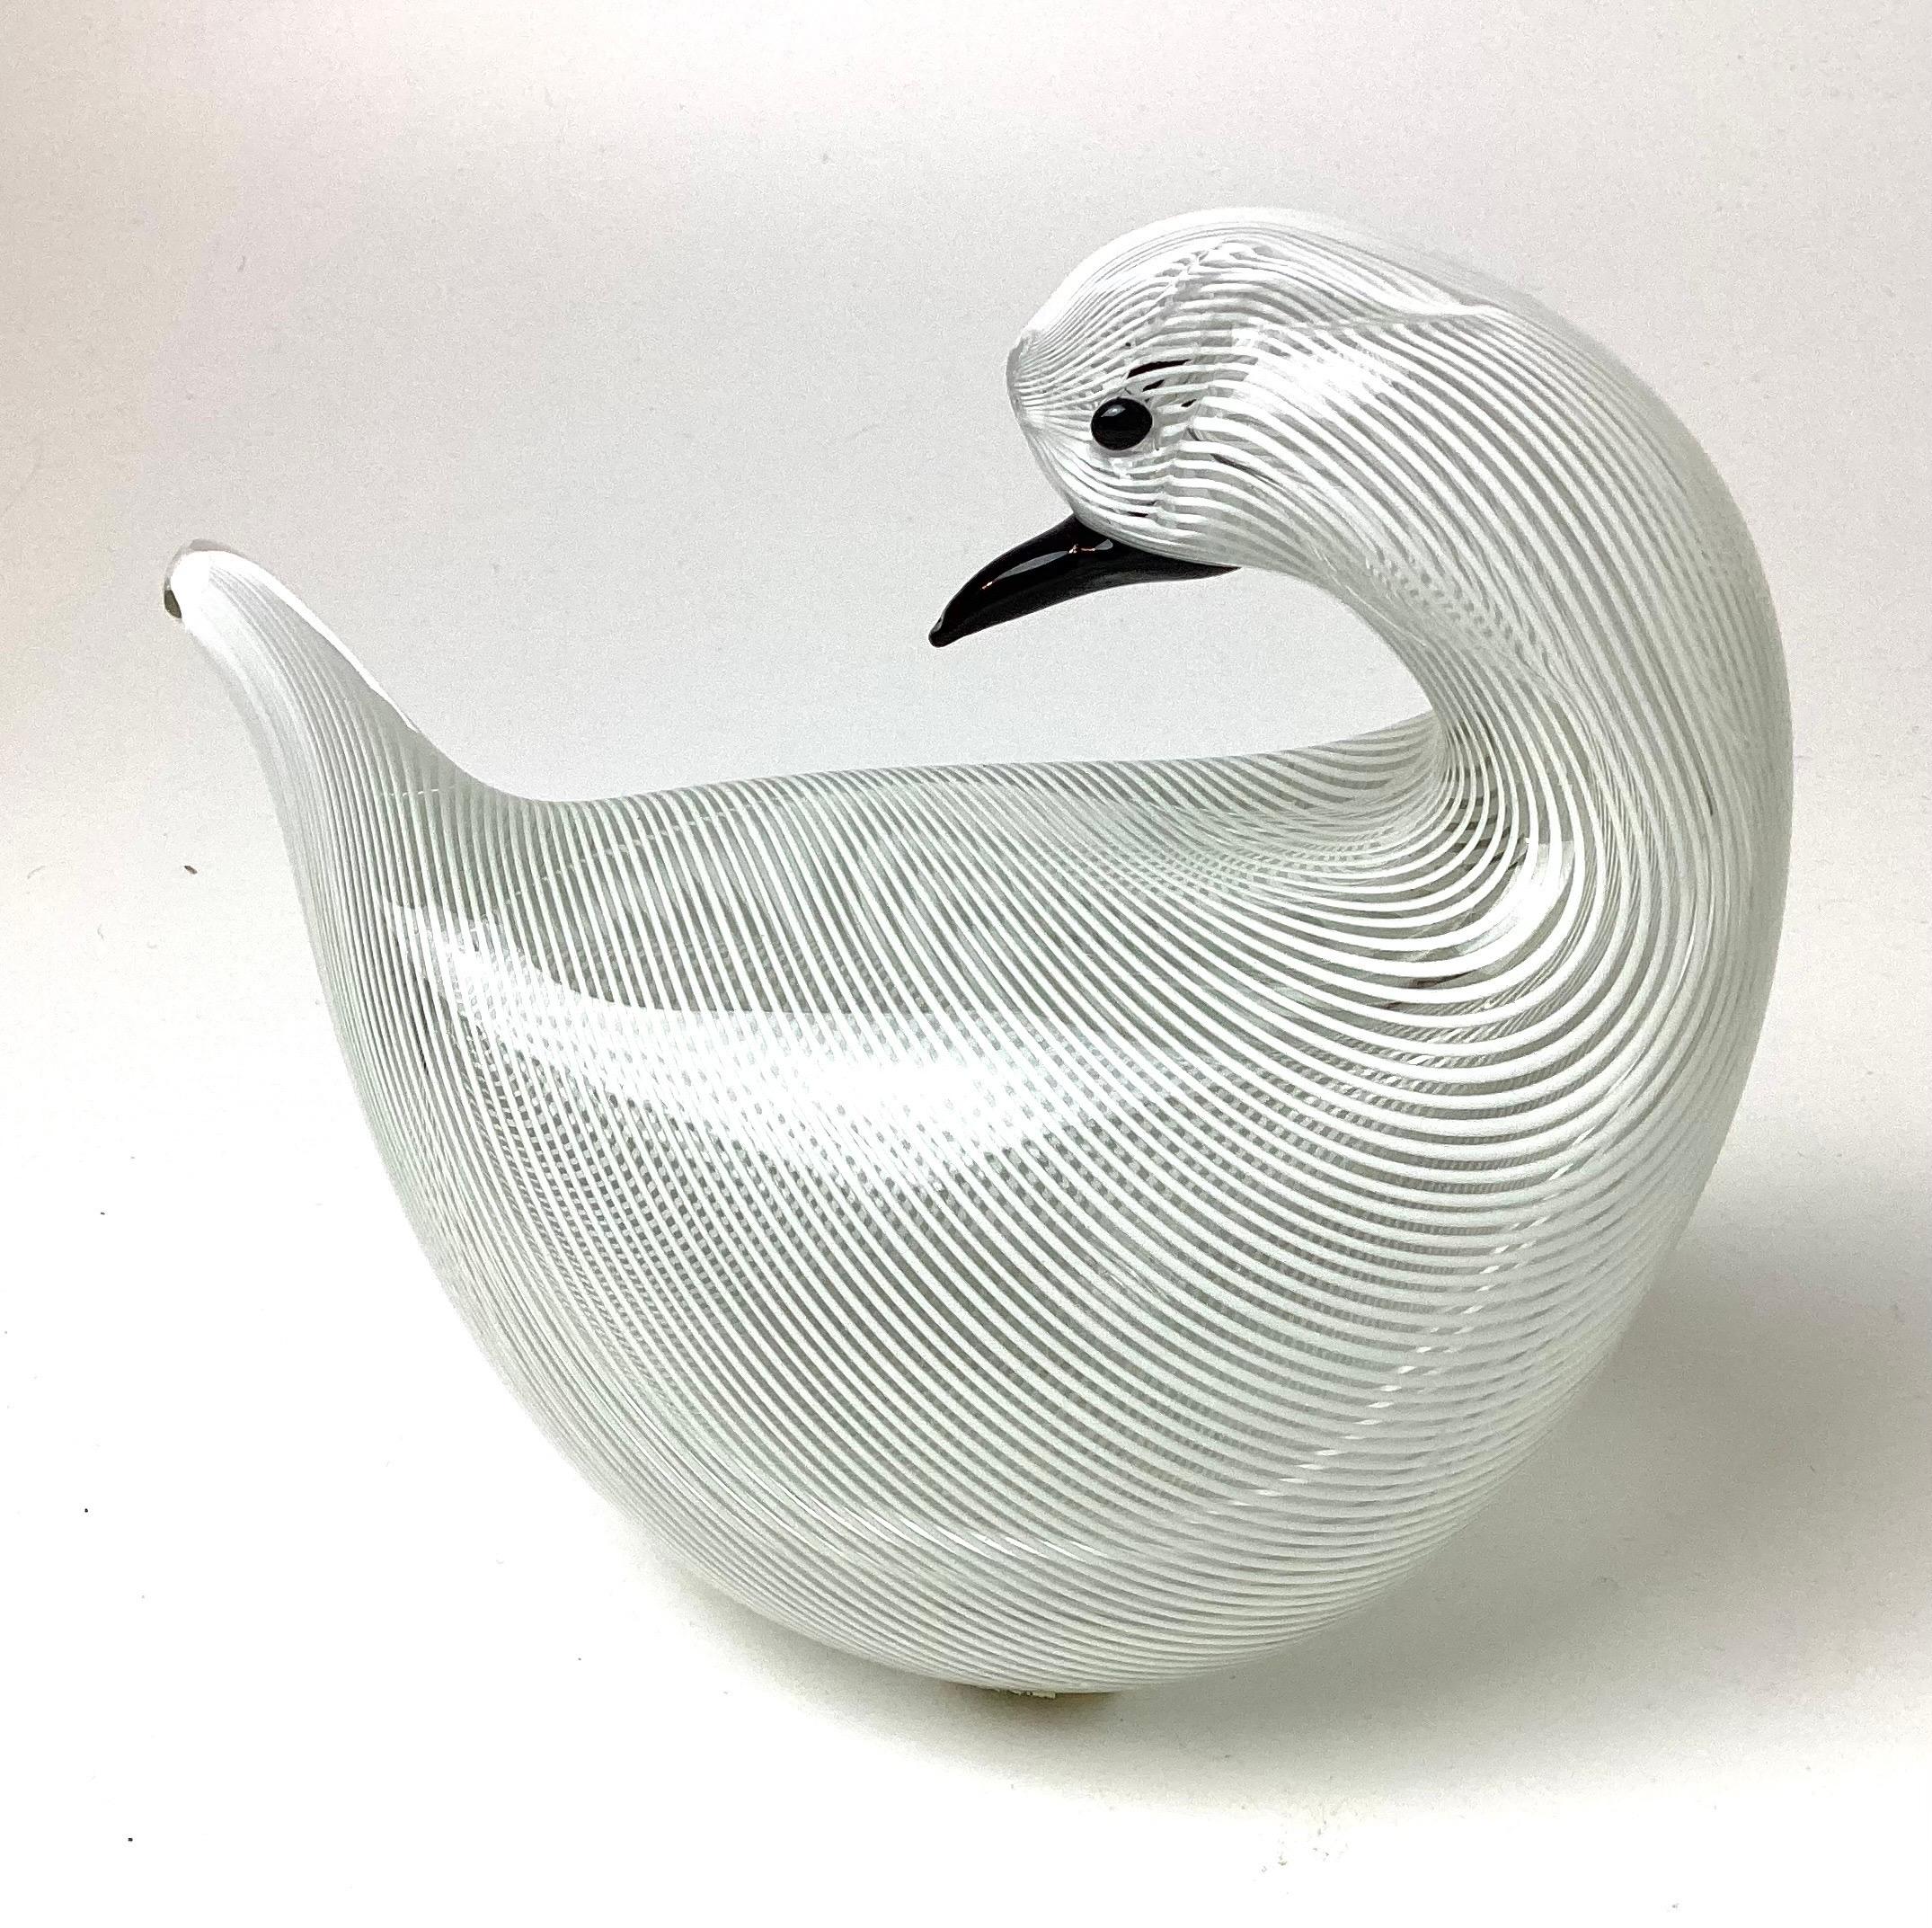 Murano Glass Italian Murano Ribbon Glass Sculpture of Bird Signed Numbered & Dated 1982 For Sale